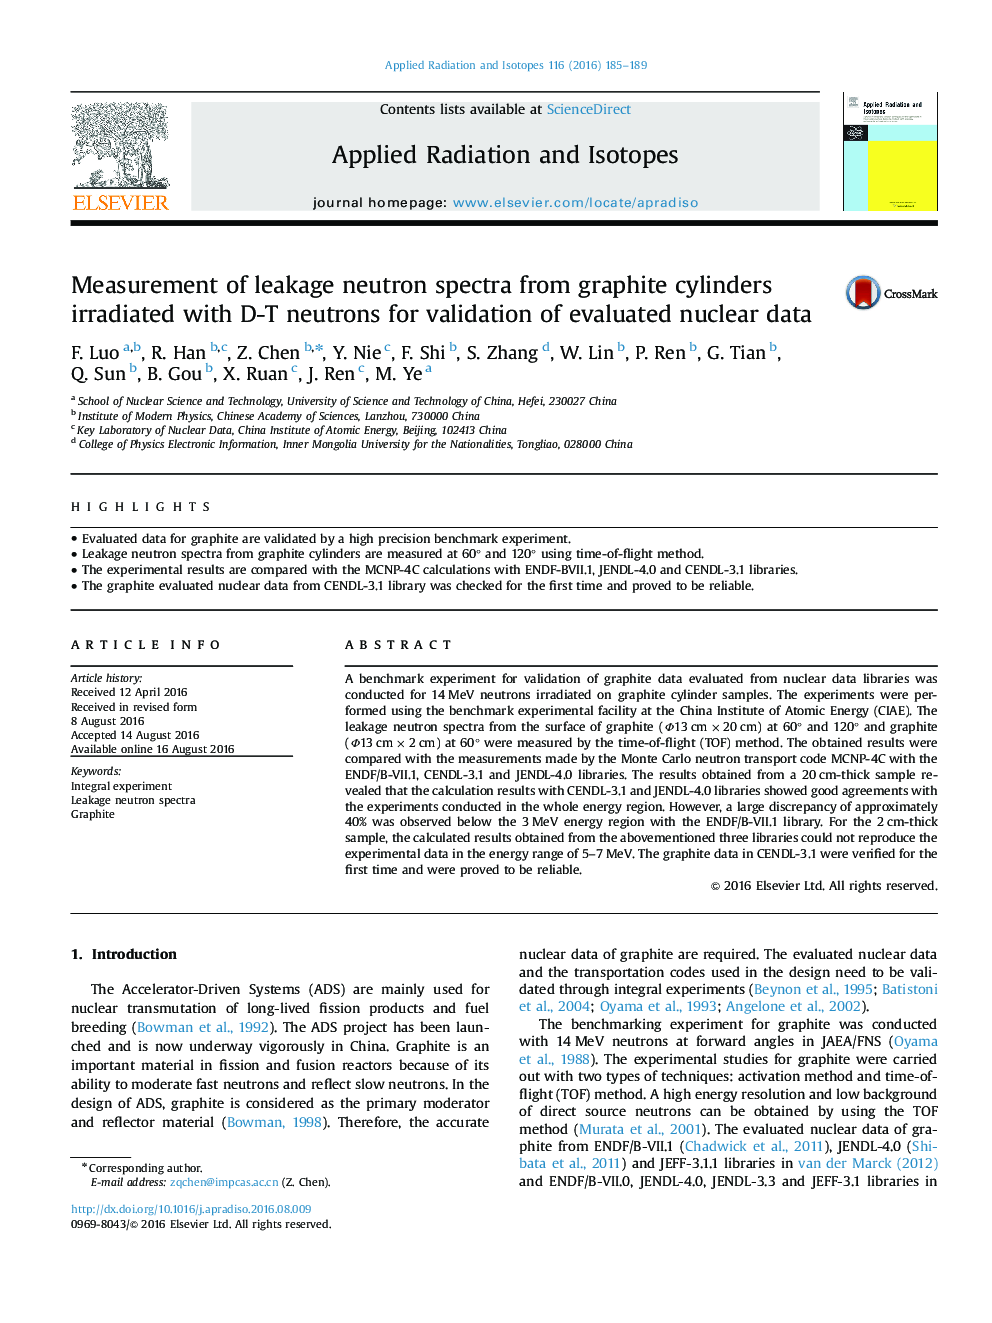 Measurement of leakage neutron spectra from graphite cylinders irradiated with D-T neutrons for validation of evaluated nuclear data